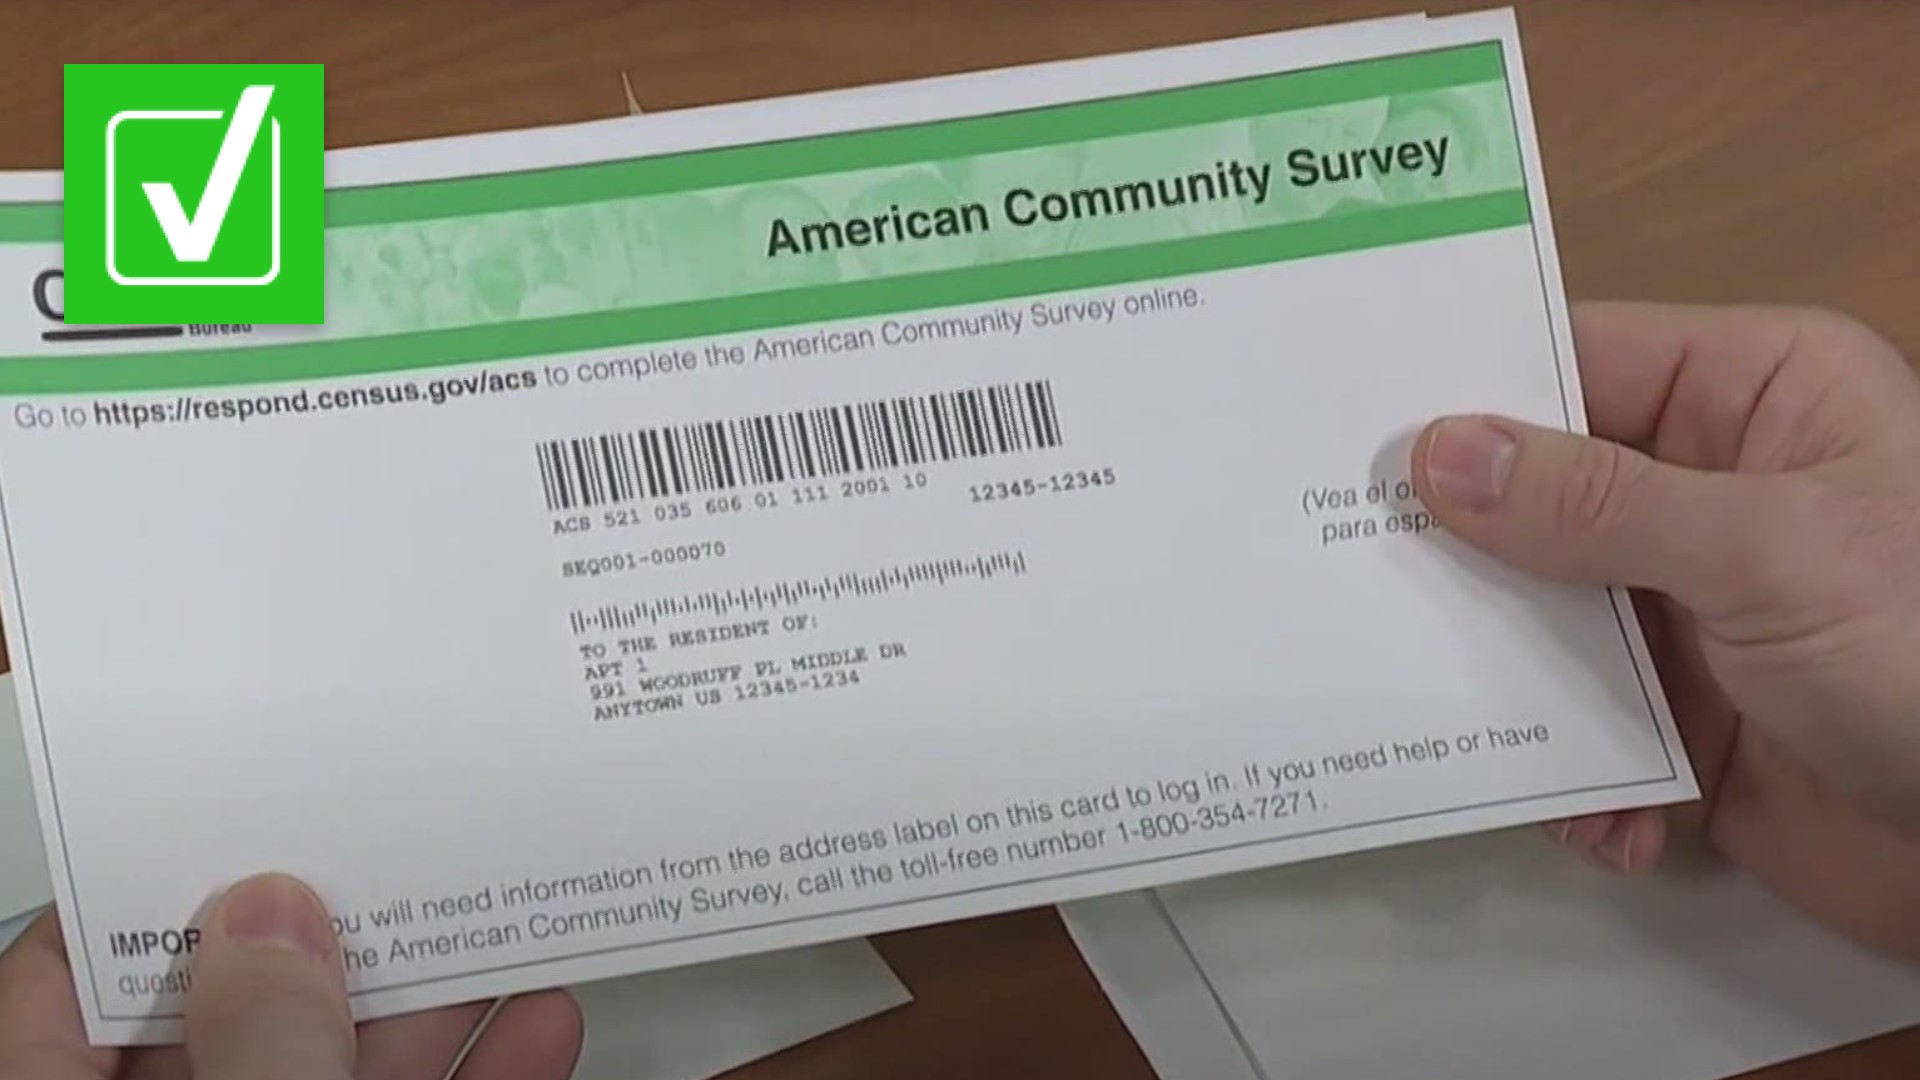 What is the American Community Survey from the census bureau?